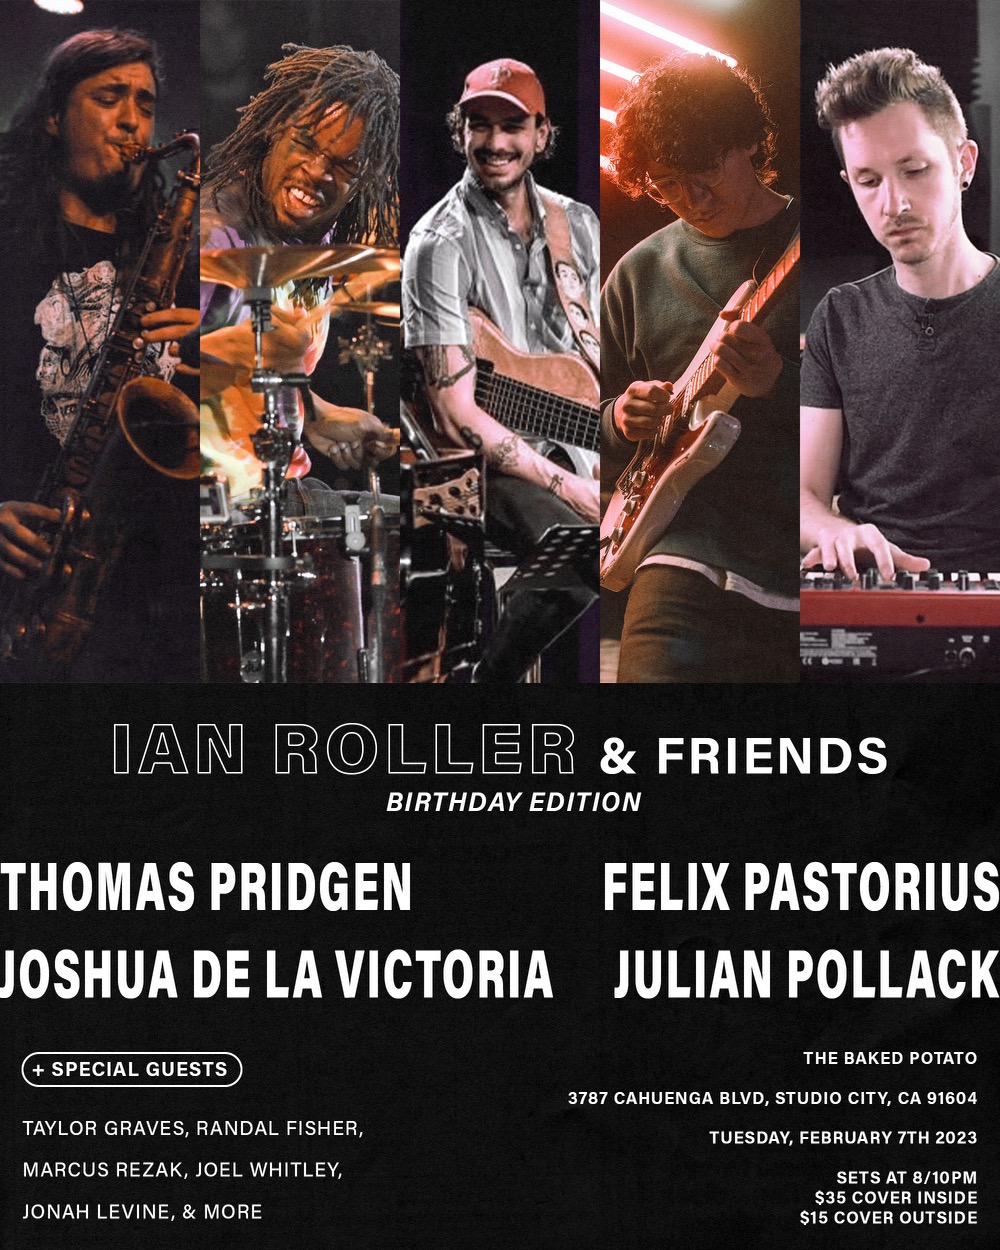 IAN ROLLER and FRIENDS - Tuesday, February 7, 2023